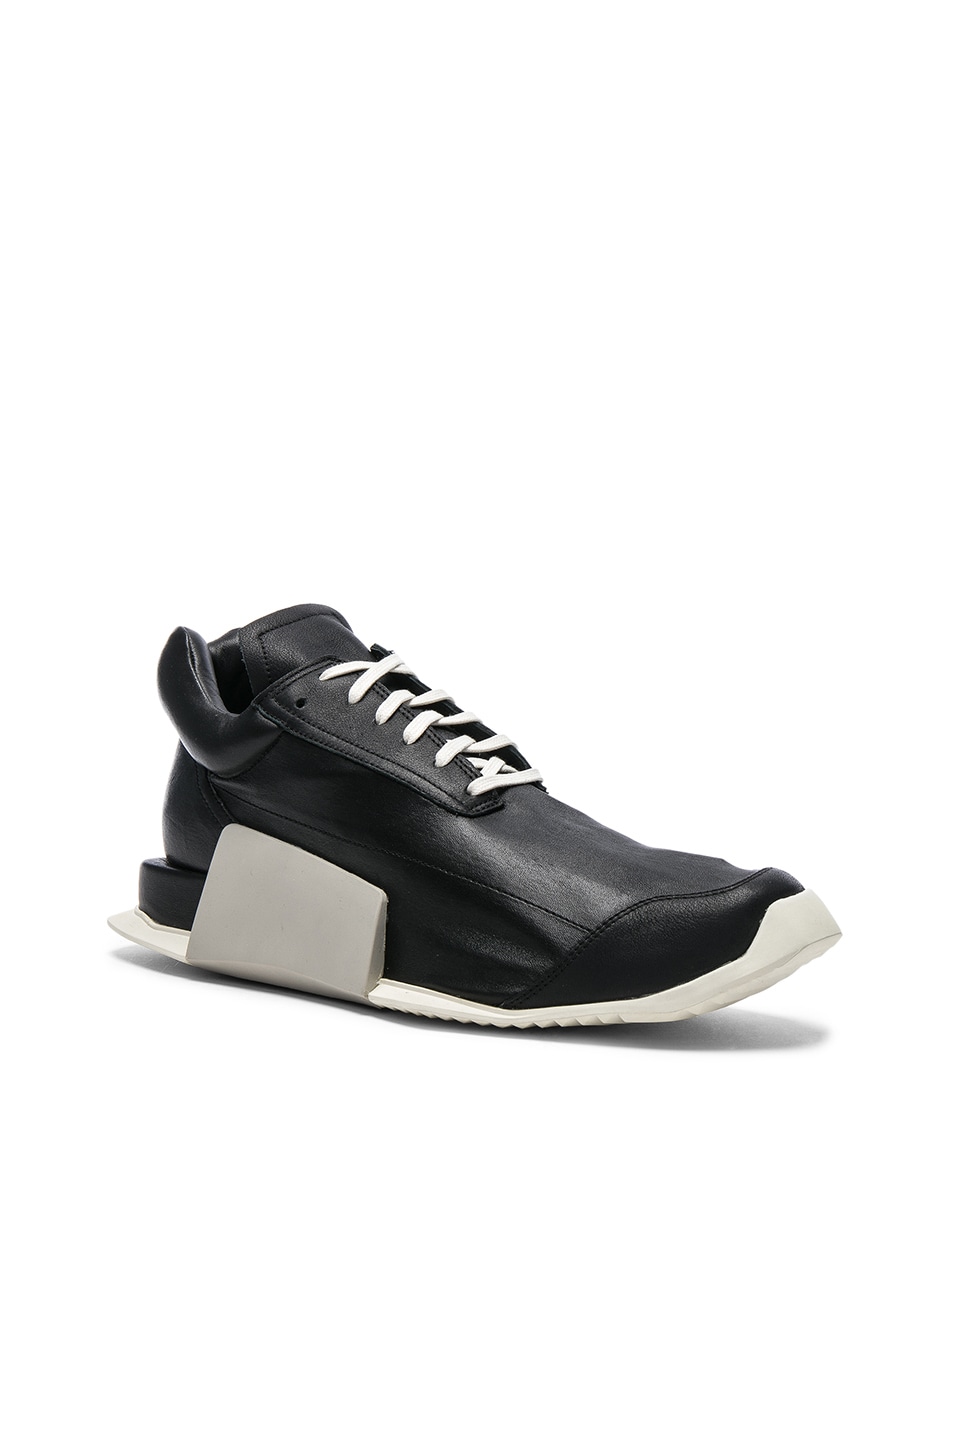 Image 1 of Rick Owens x Adidas Level Runner Boosts in Black